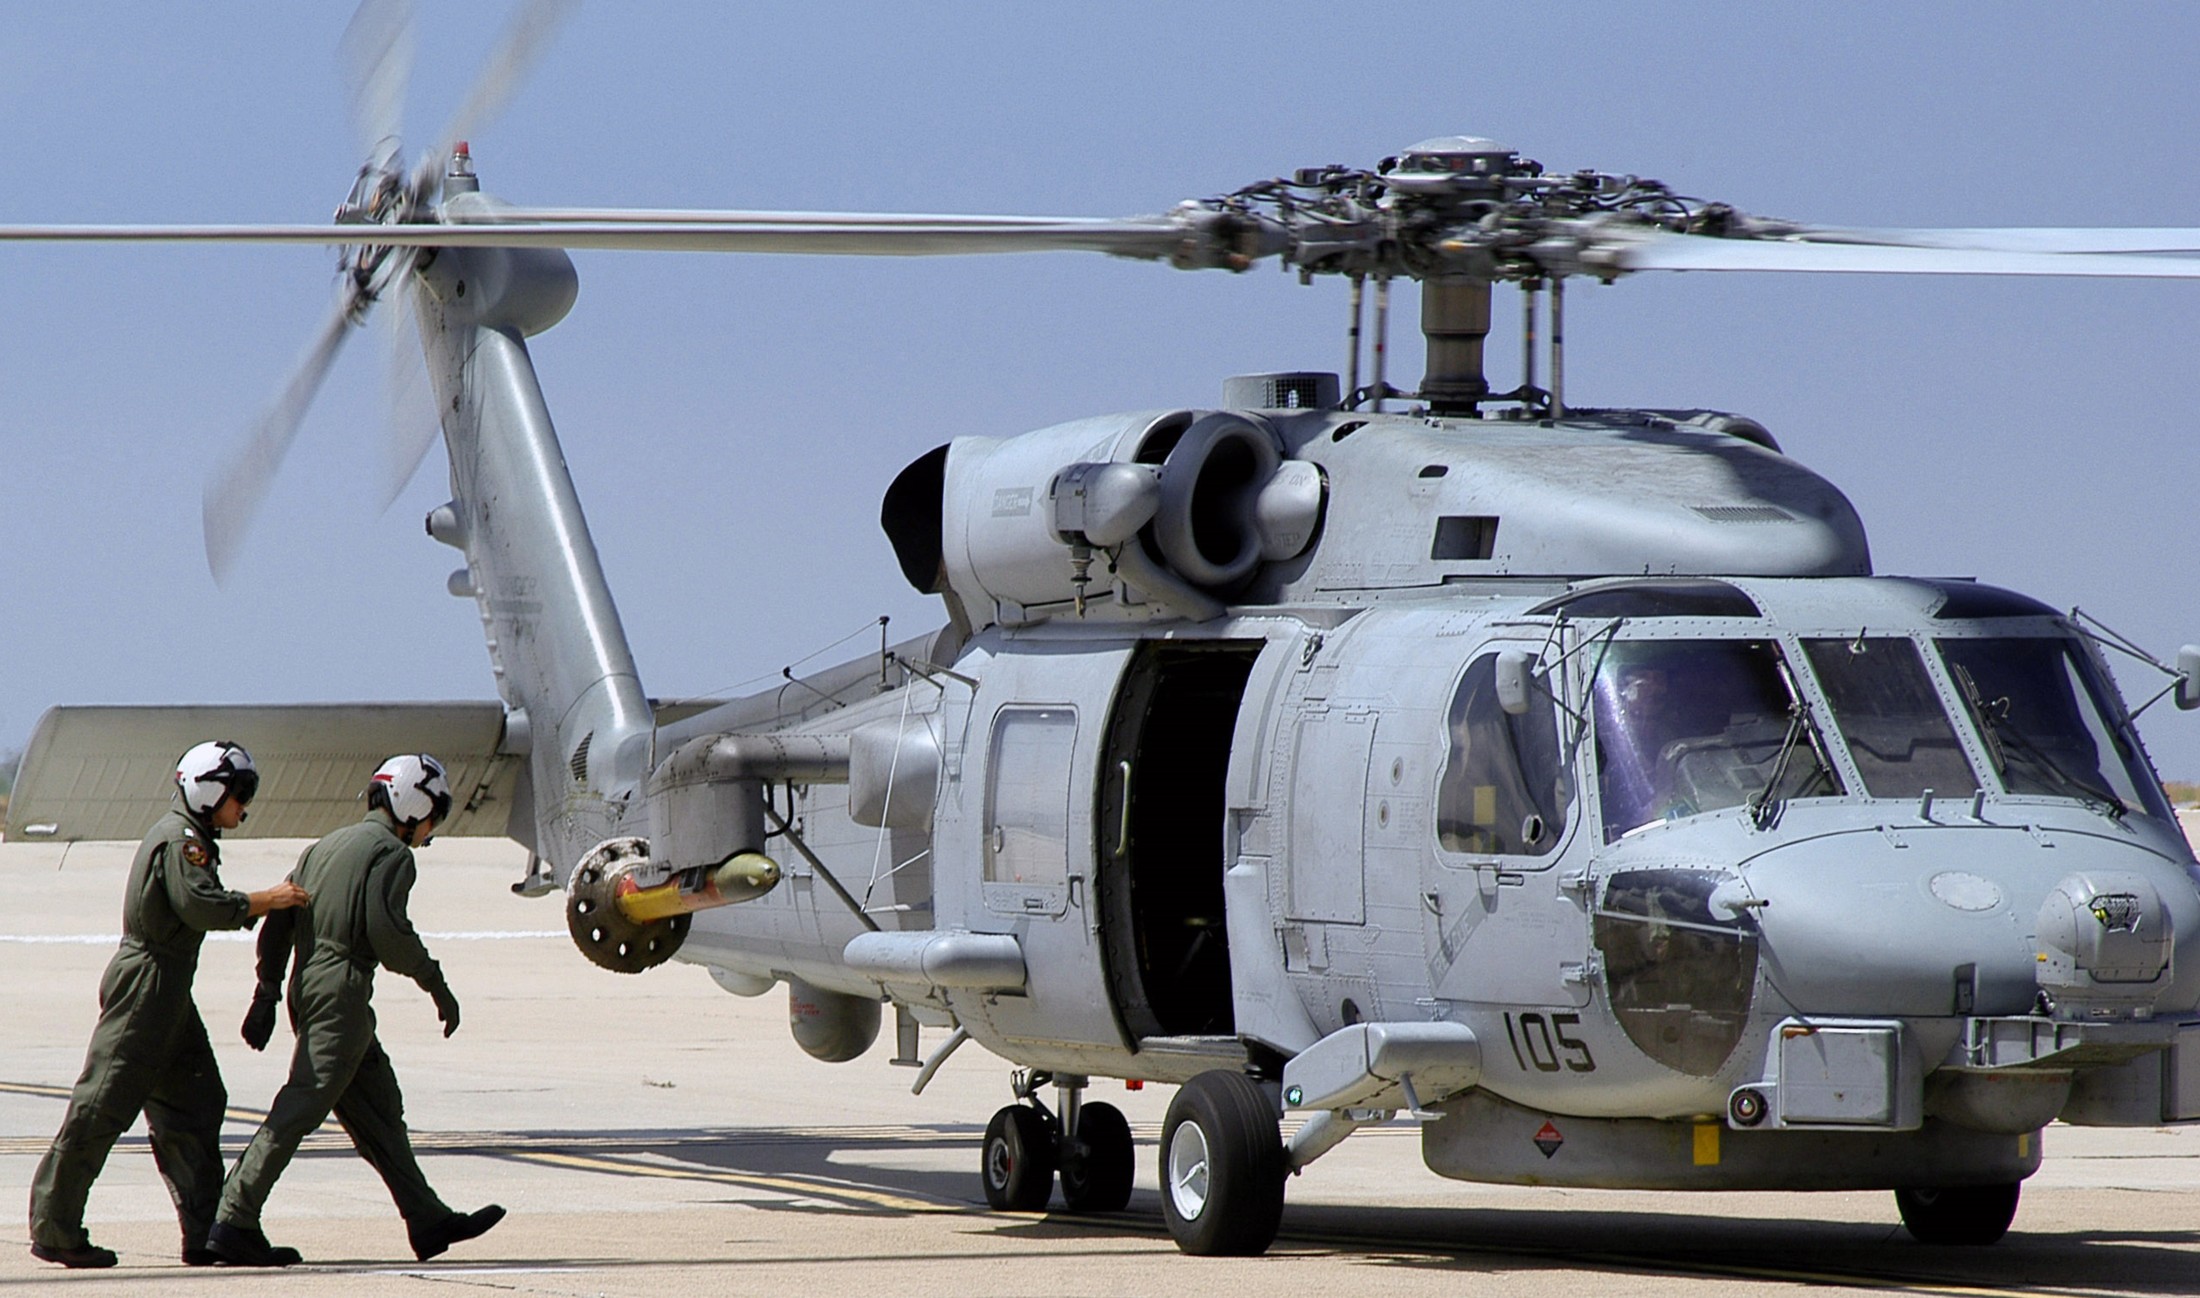 hsm-41 seahawks helicopter maritime strike squadron mh-60r fleet replacement navy 2007 09